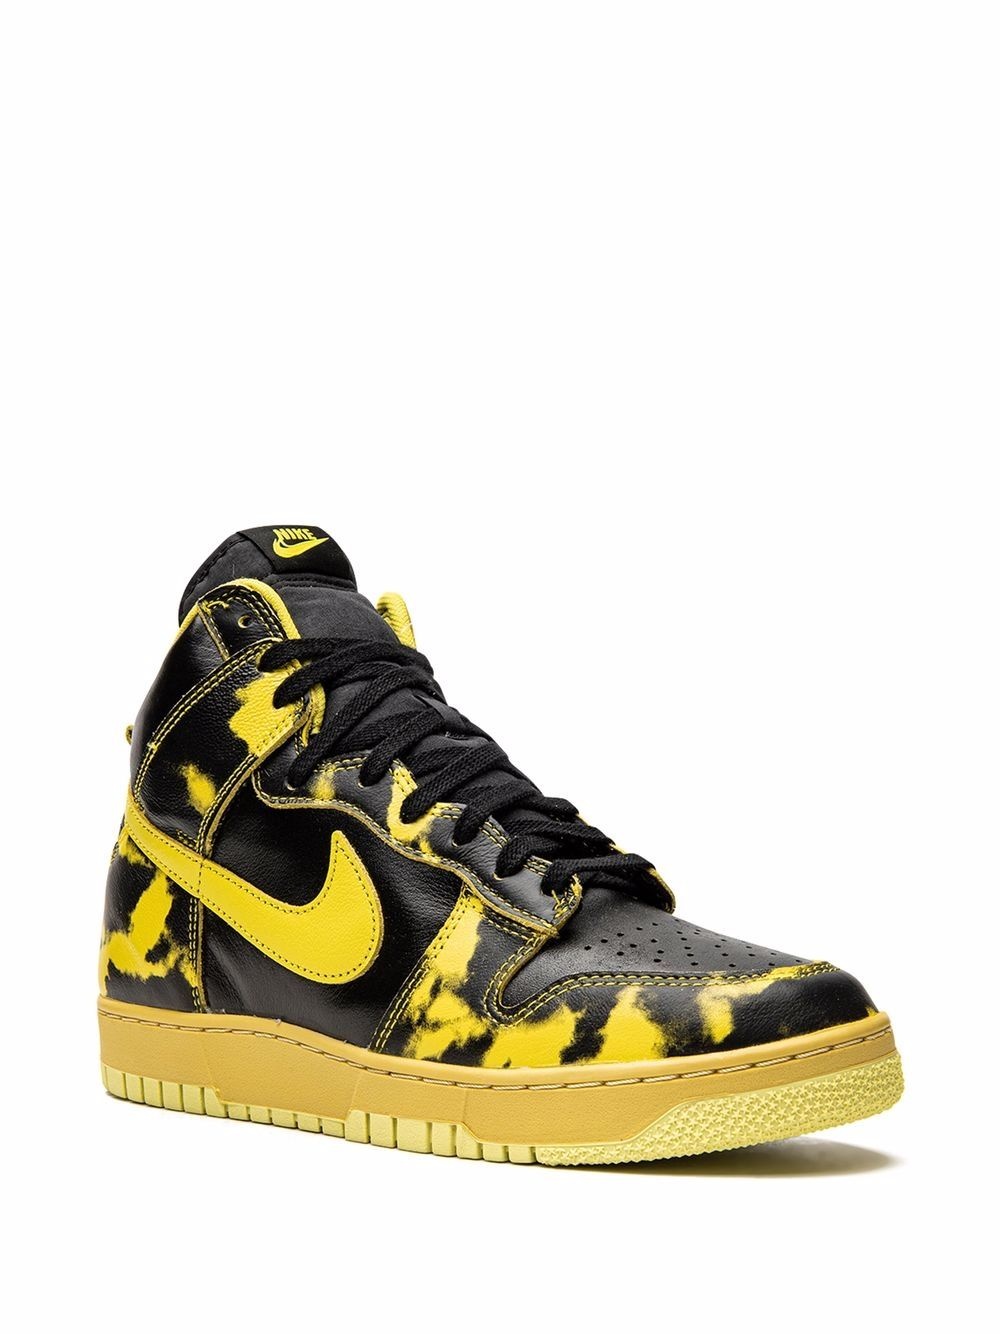 Dunk High 1985 "Yellow Acid Wash" sneakers - 2